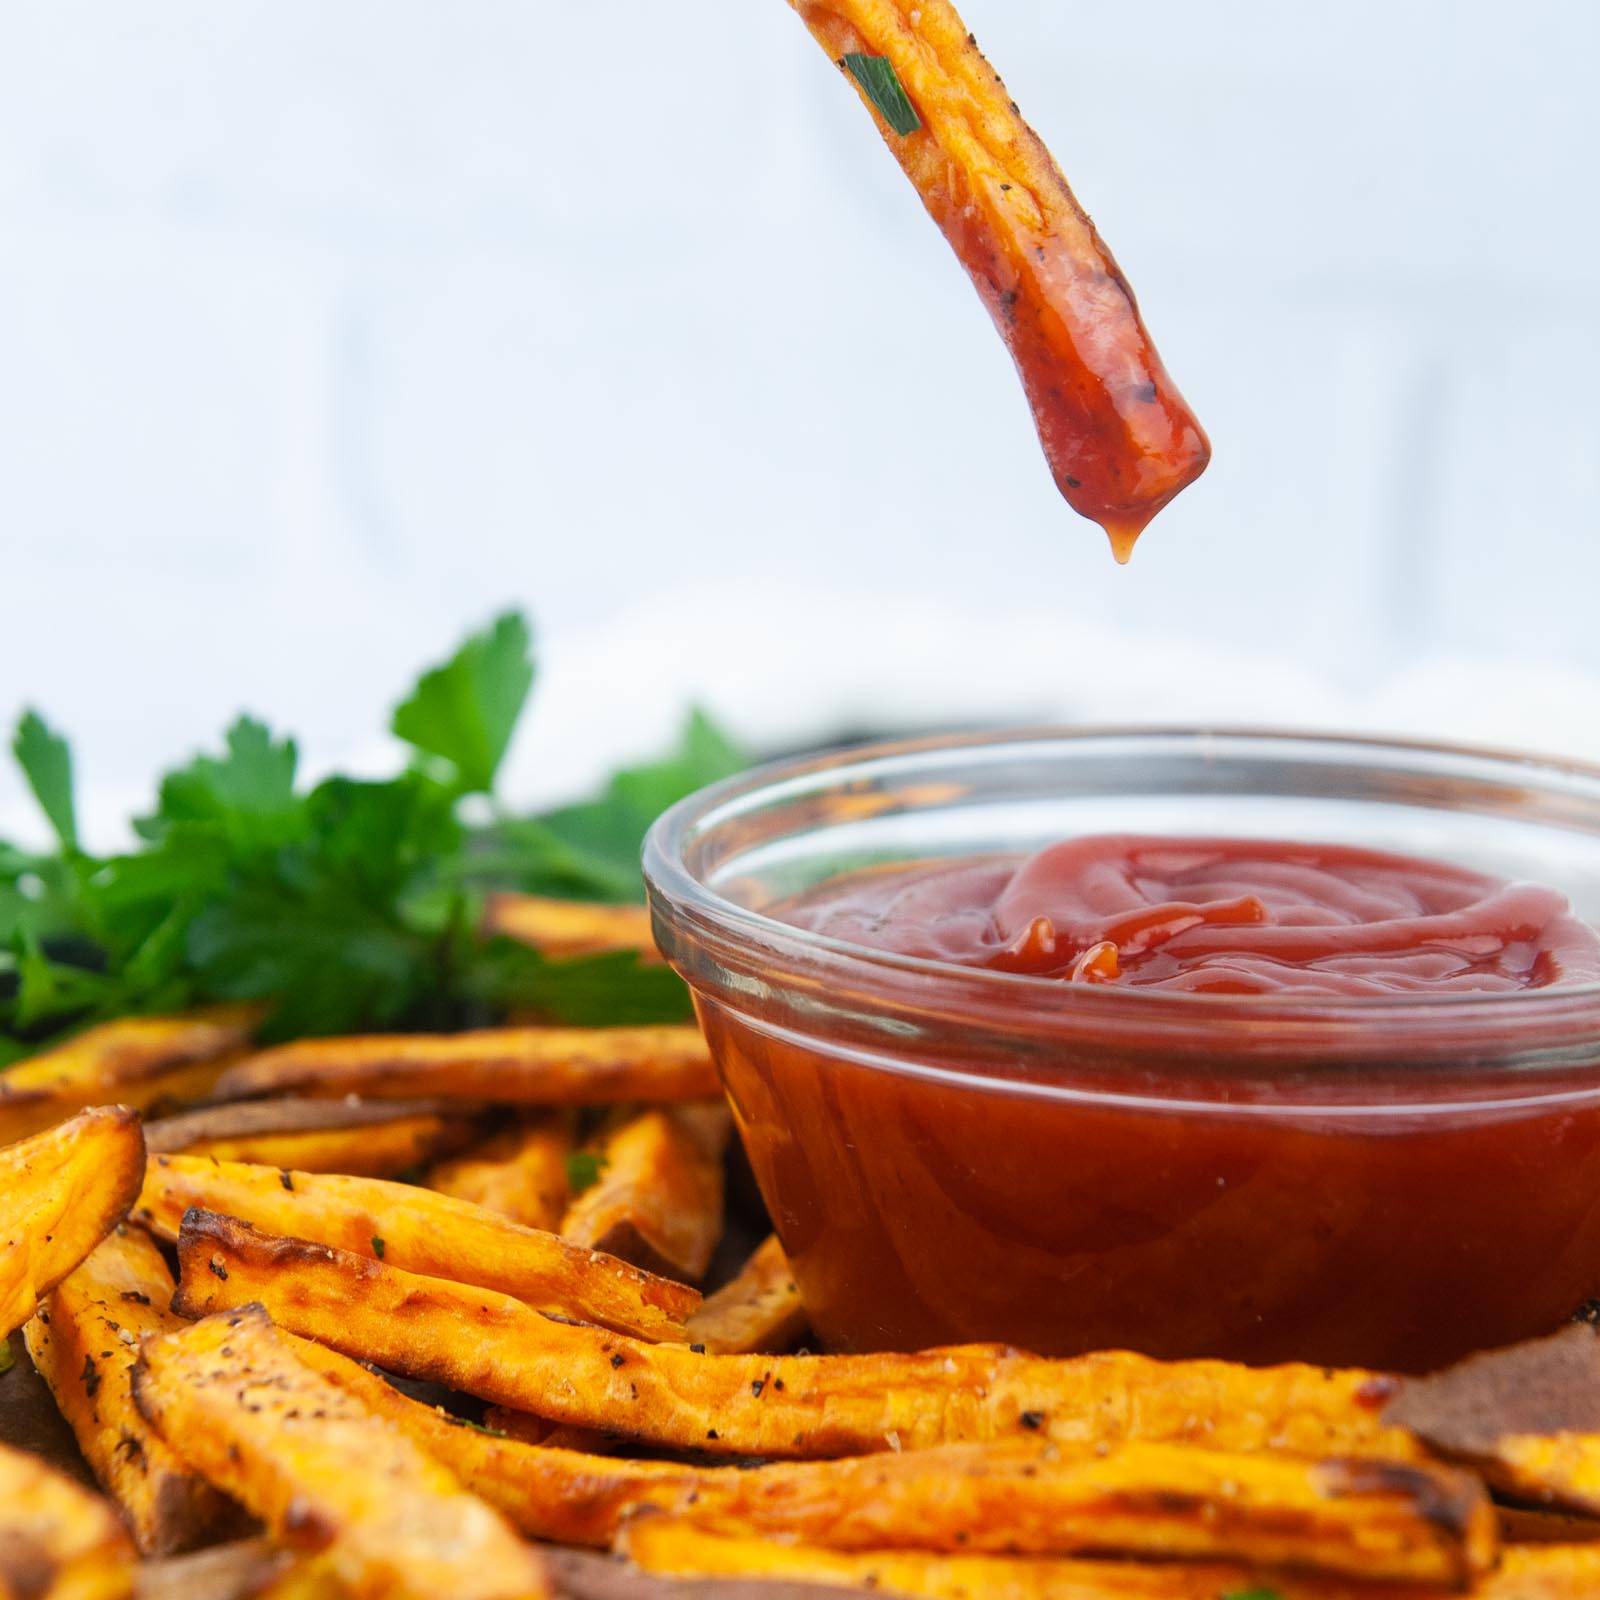 Baked Sweet Potato Fries dunked in ketchup make a yummy, kid friendly side dish.